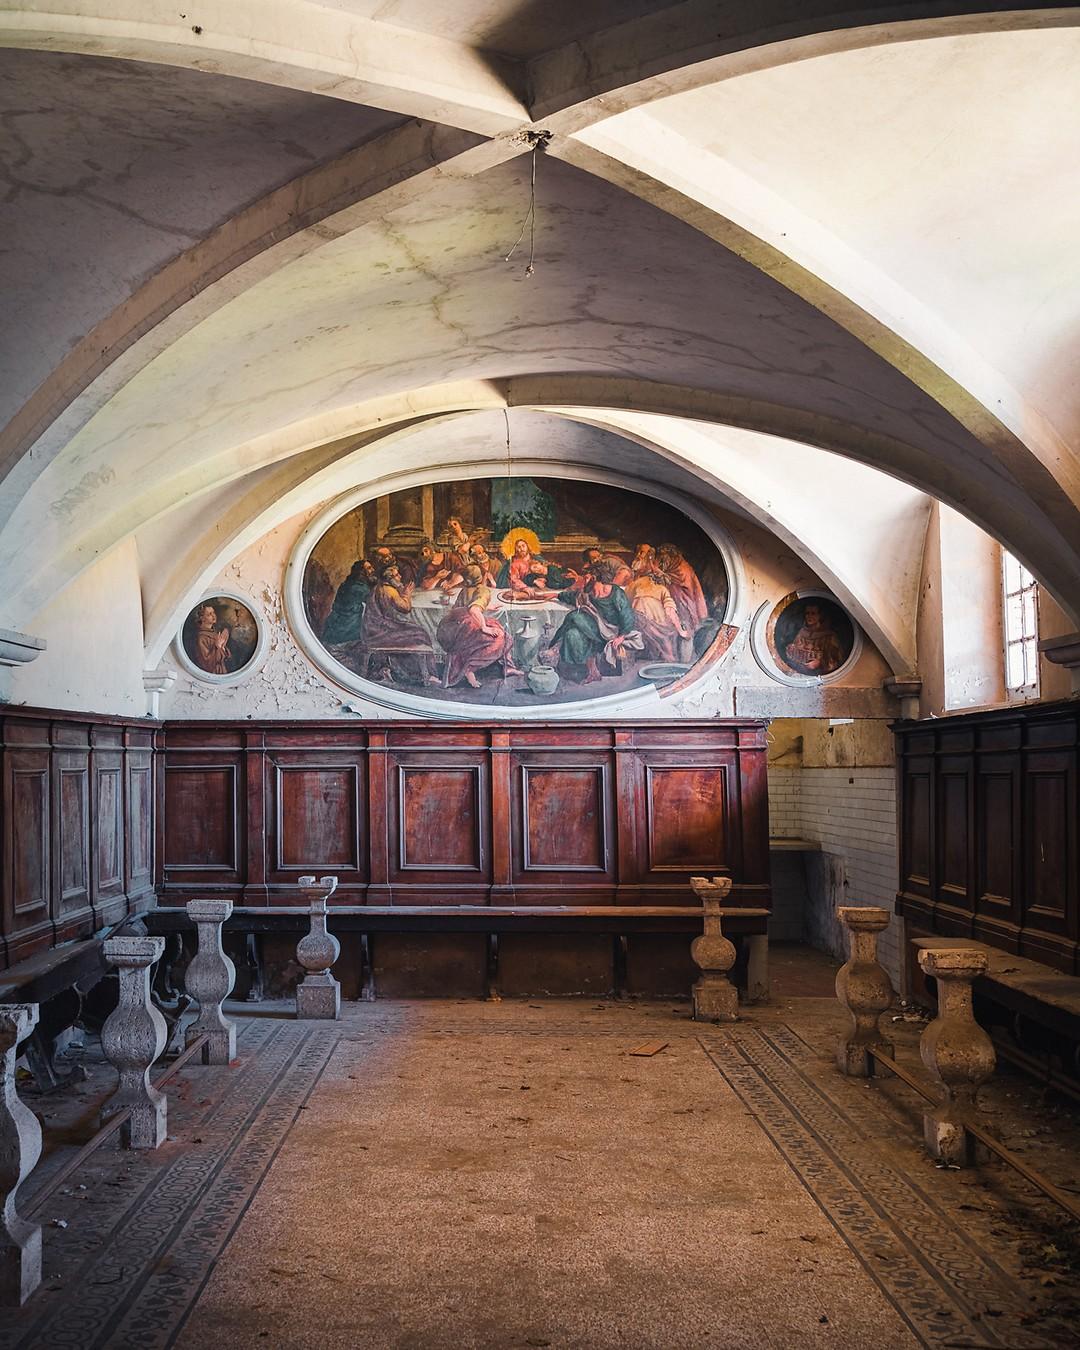 An interior located in the Viterbo province, Italy, features a mural of "The Last Supper." (Courtesy of <a href="https://romanrobroek.nl/">Roman Robroek Photography</a> and <a href="https://www.instagram.com/romanrobroek/">@romanrobroek</a>)